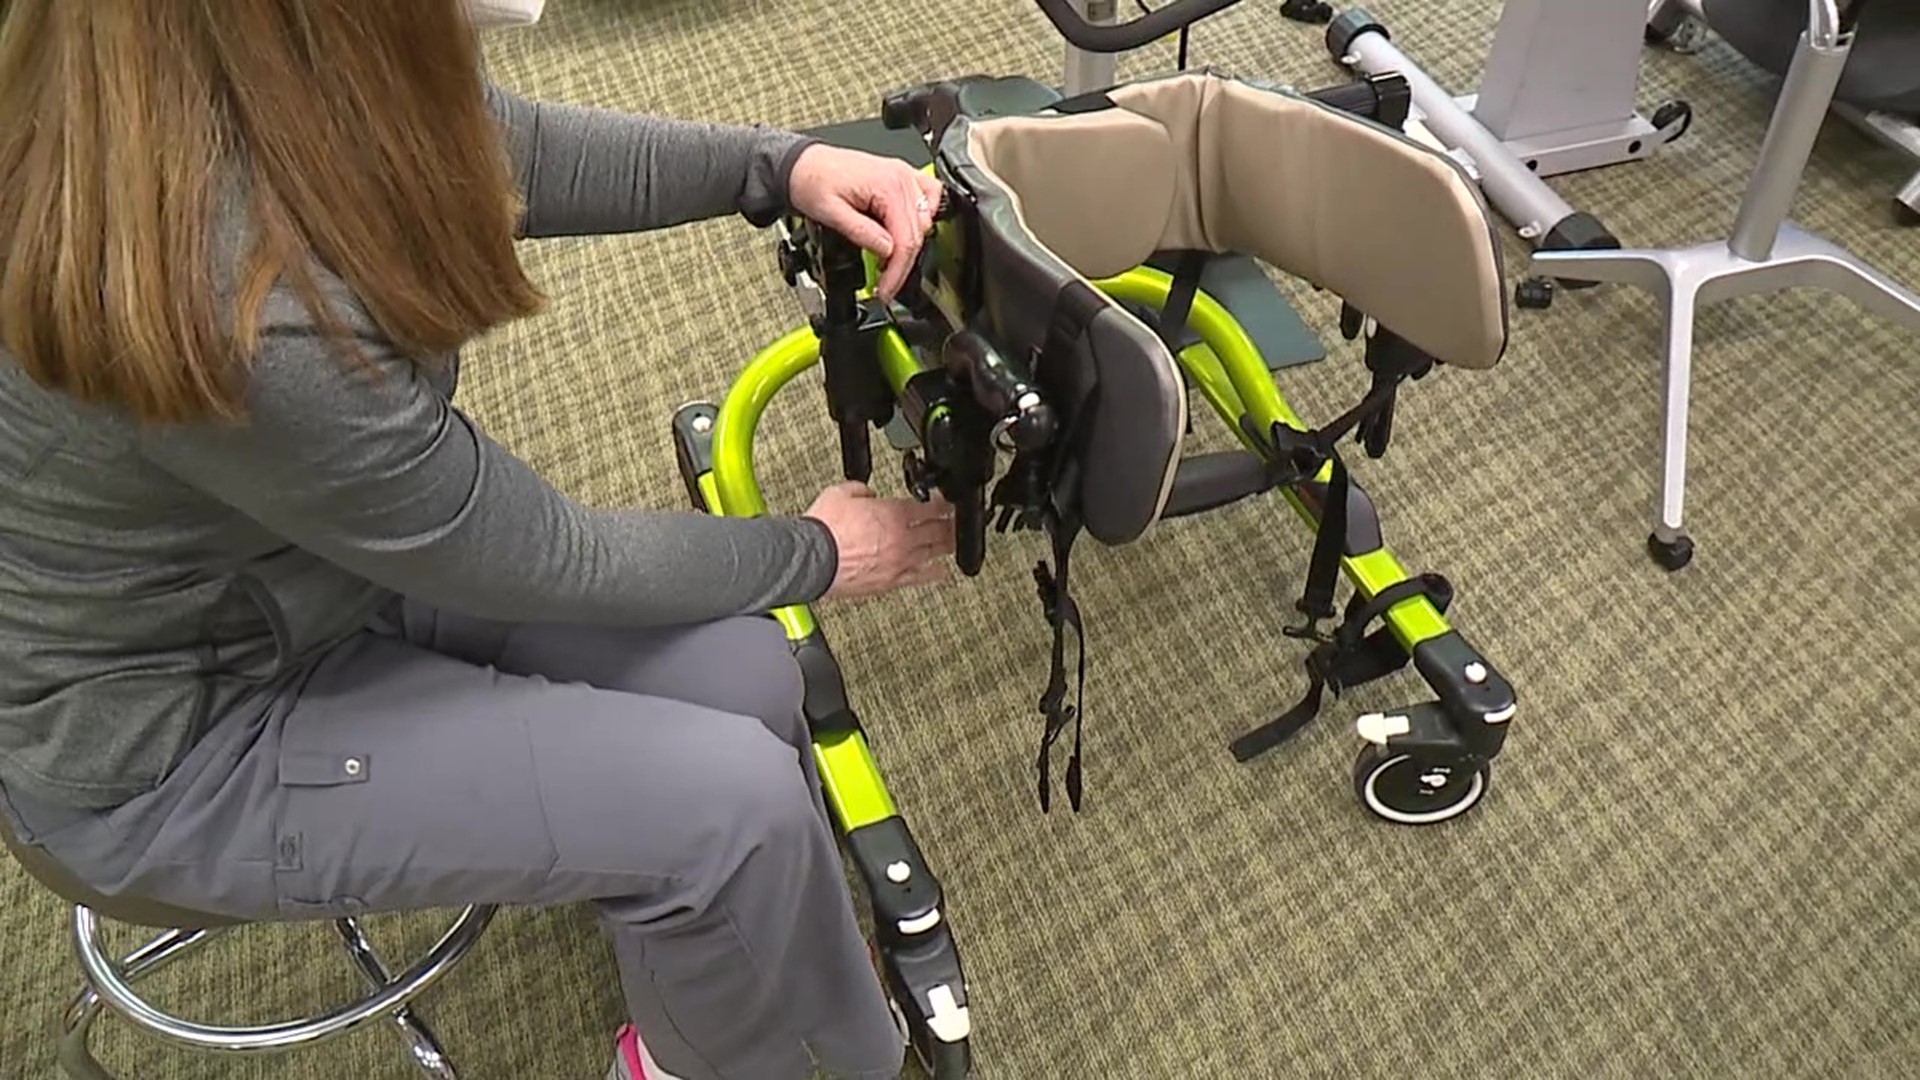 Newswatch 16's Ally Gallo shows us a newer piece of equipment on the market that will help pediatric patients at Allied Services.